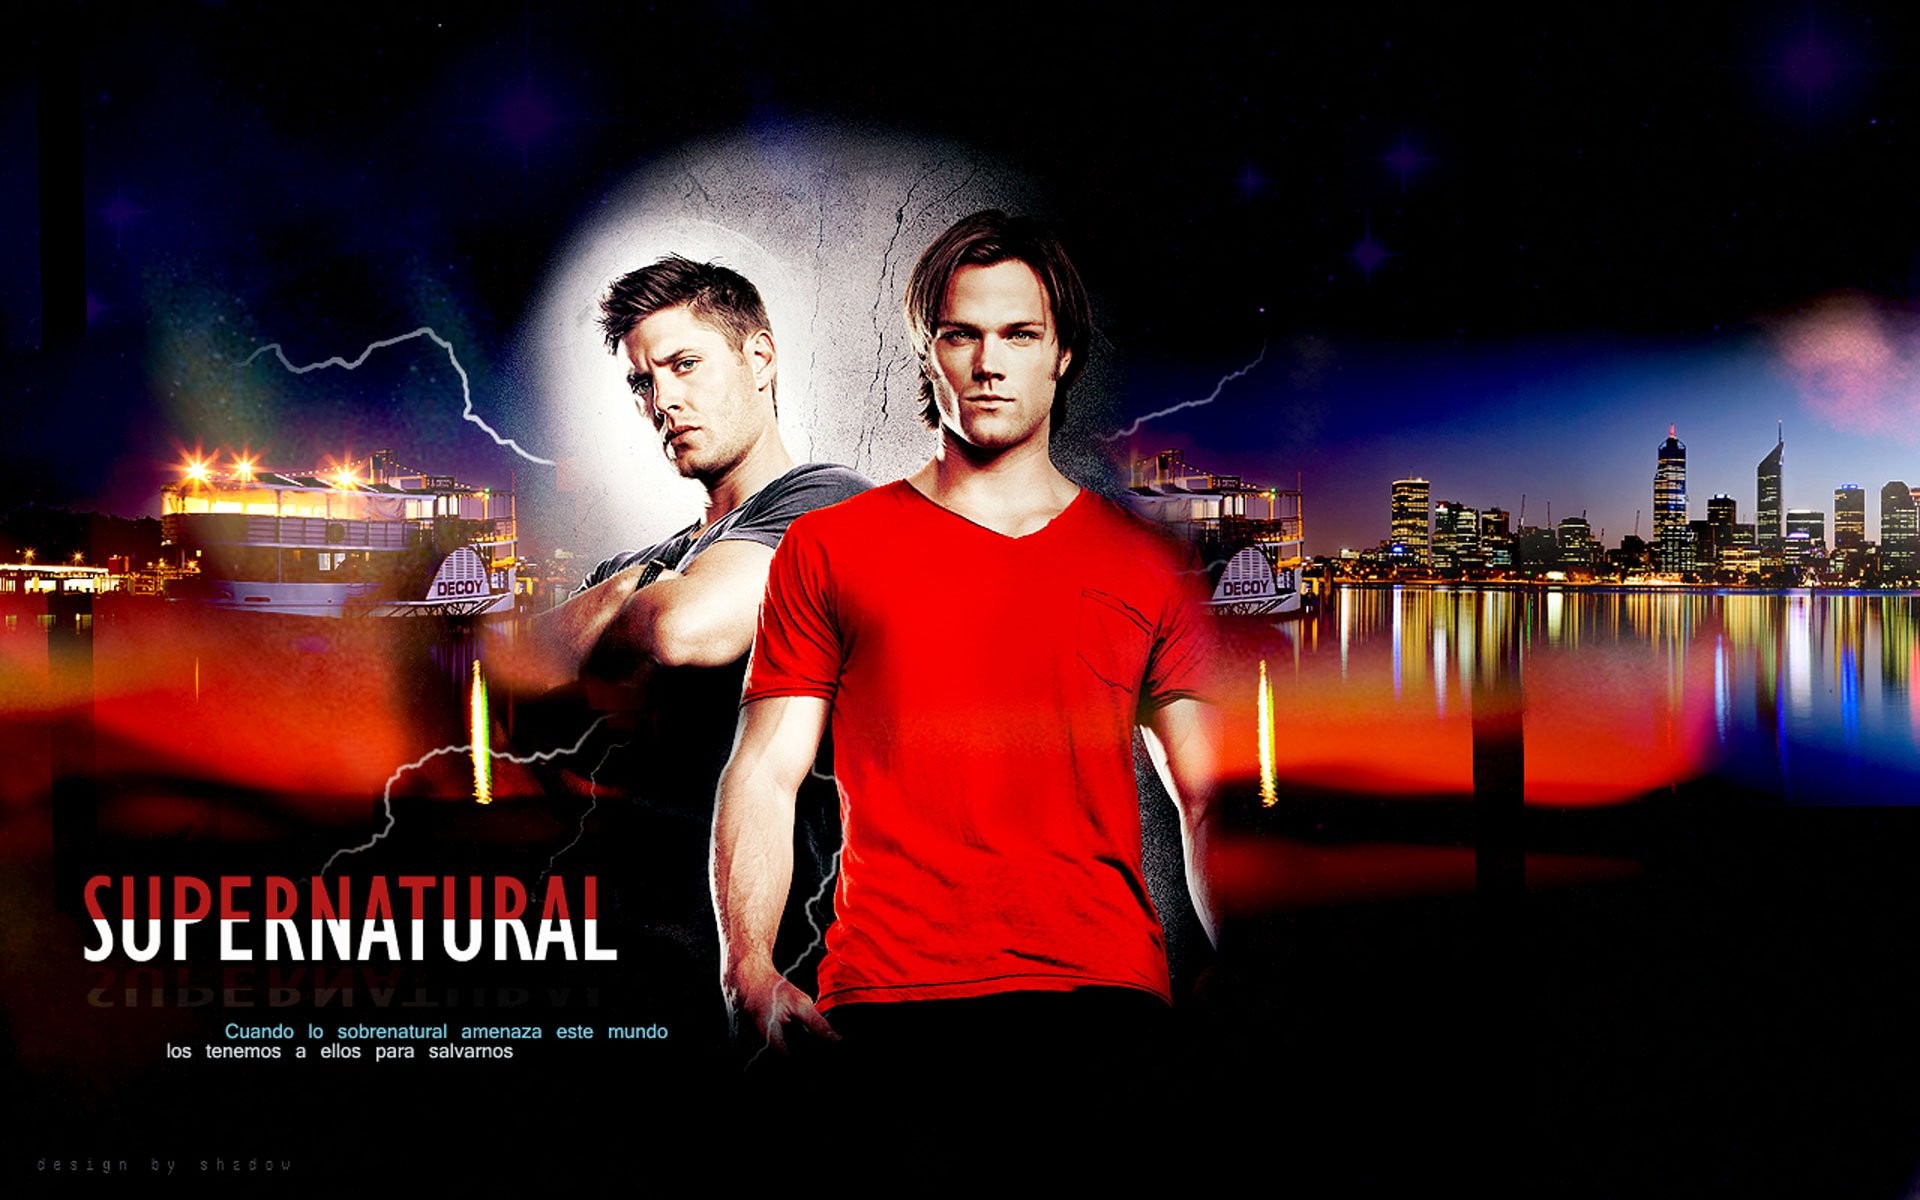  supernatural phone  android HD Photos  Wallpapers 120 Images   Page 5